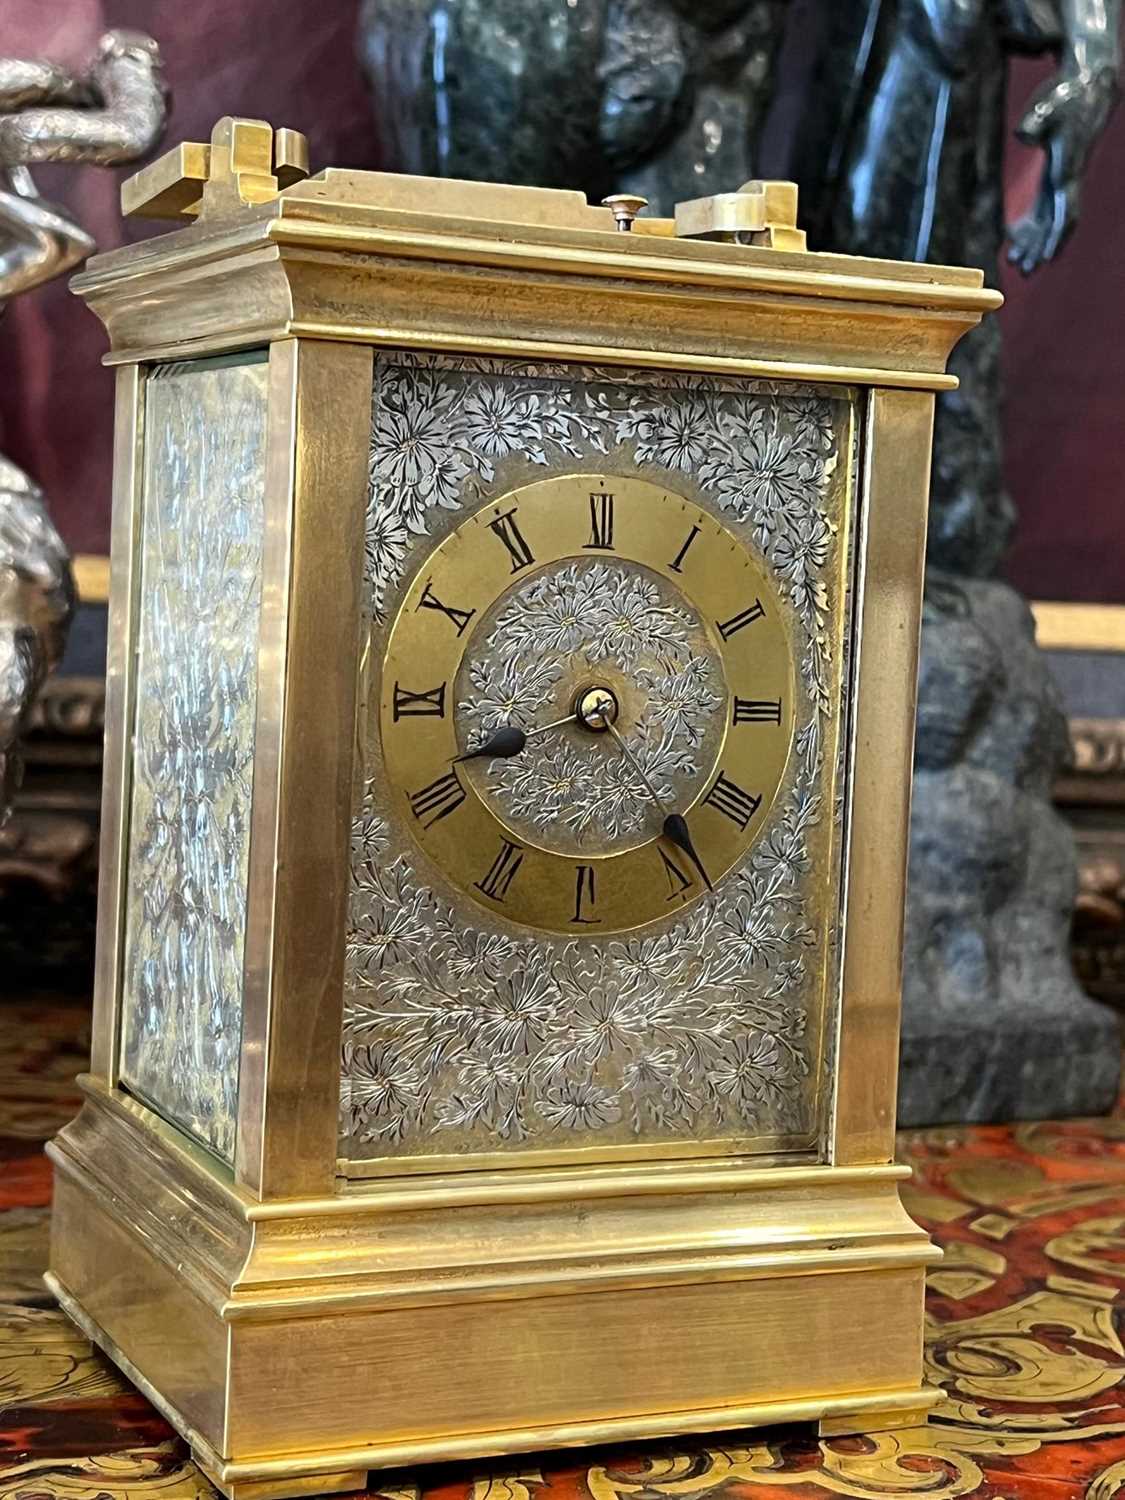 A FINE LATE 19TH CENTURY FRENCH CARRIAGE CLOCK WITH SIILVERED ENGRAVED PANELS - Image 3 of 6